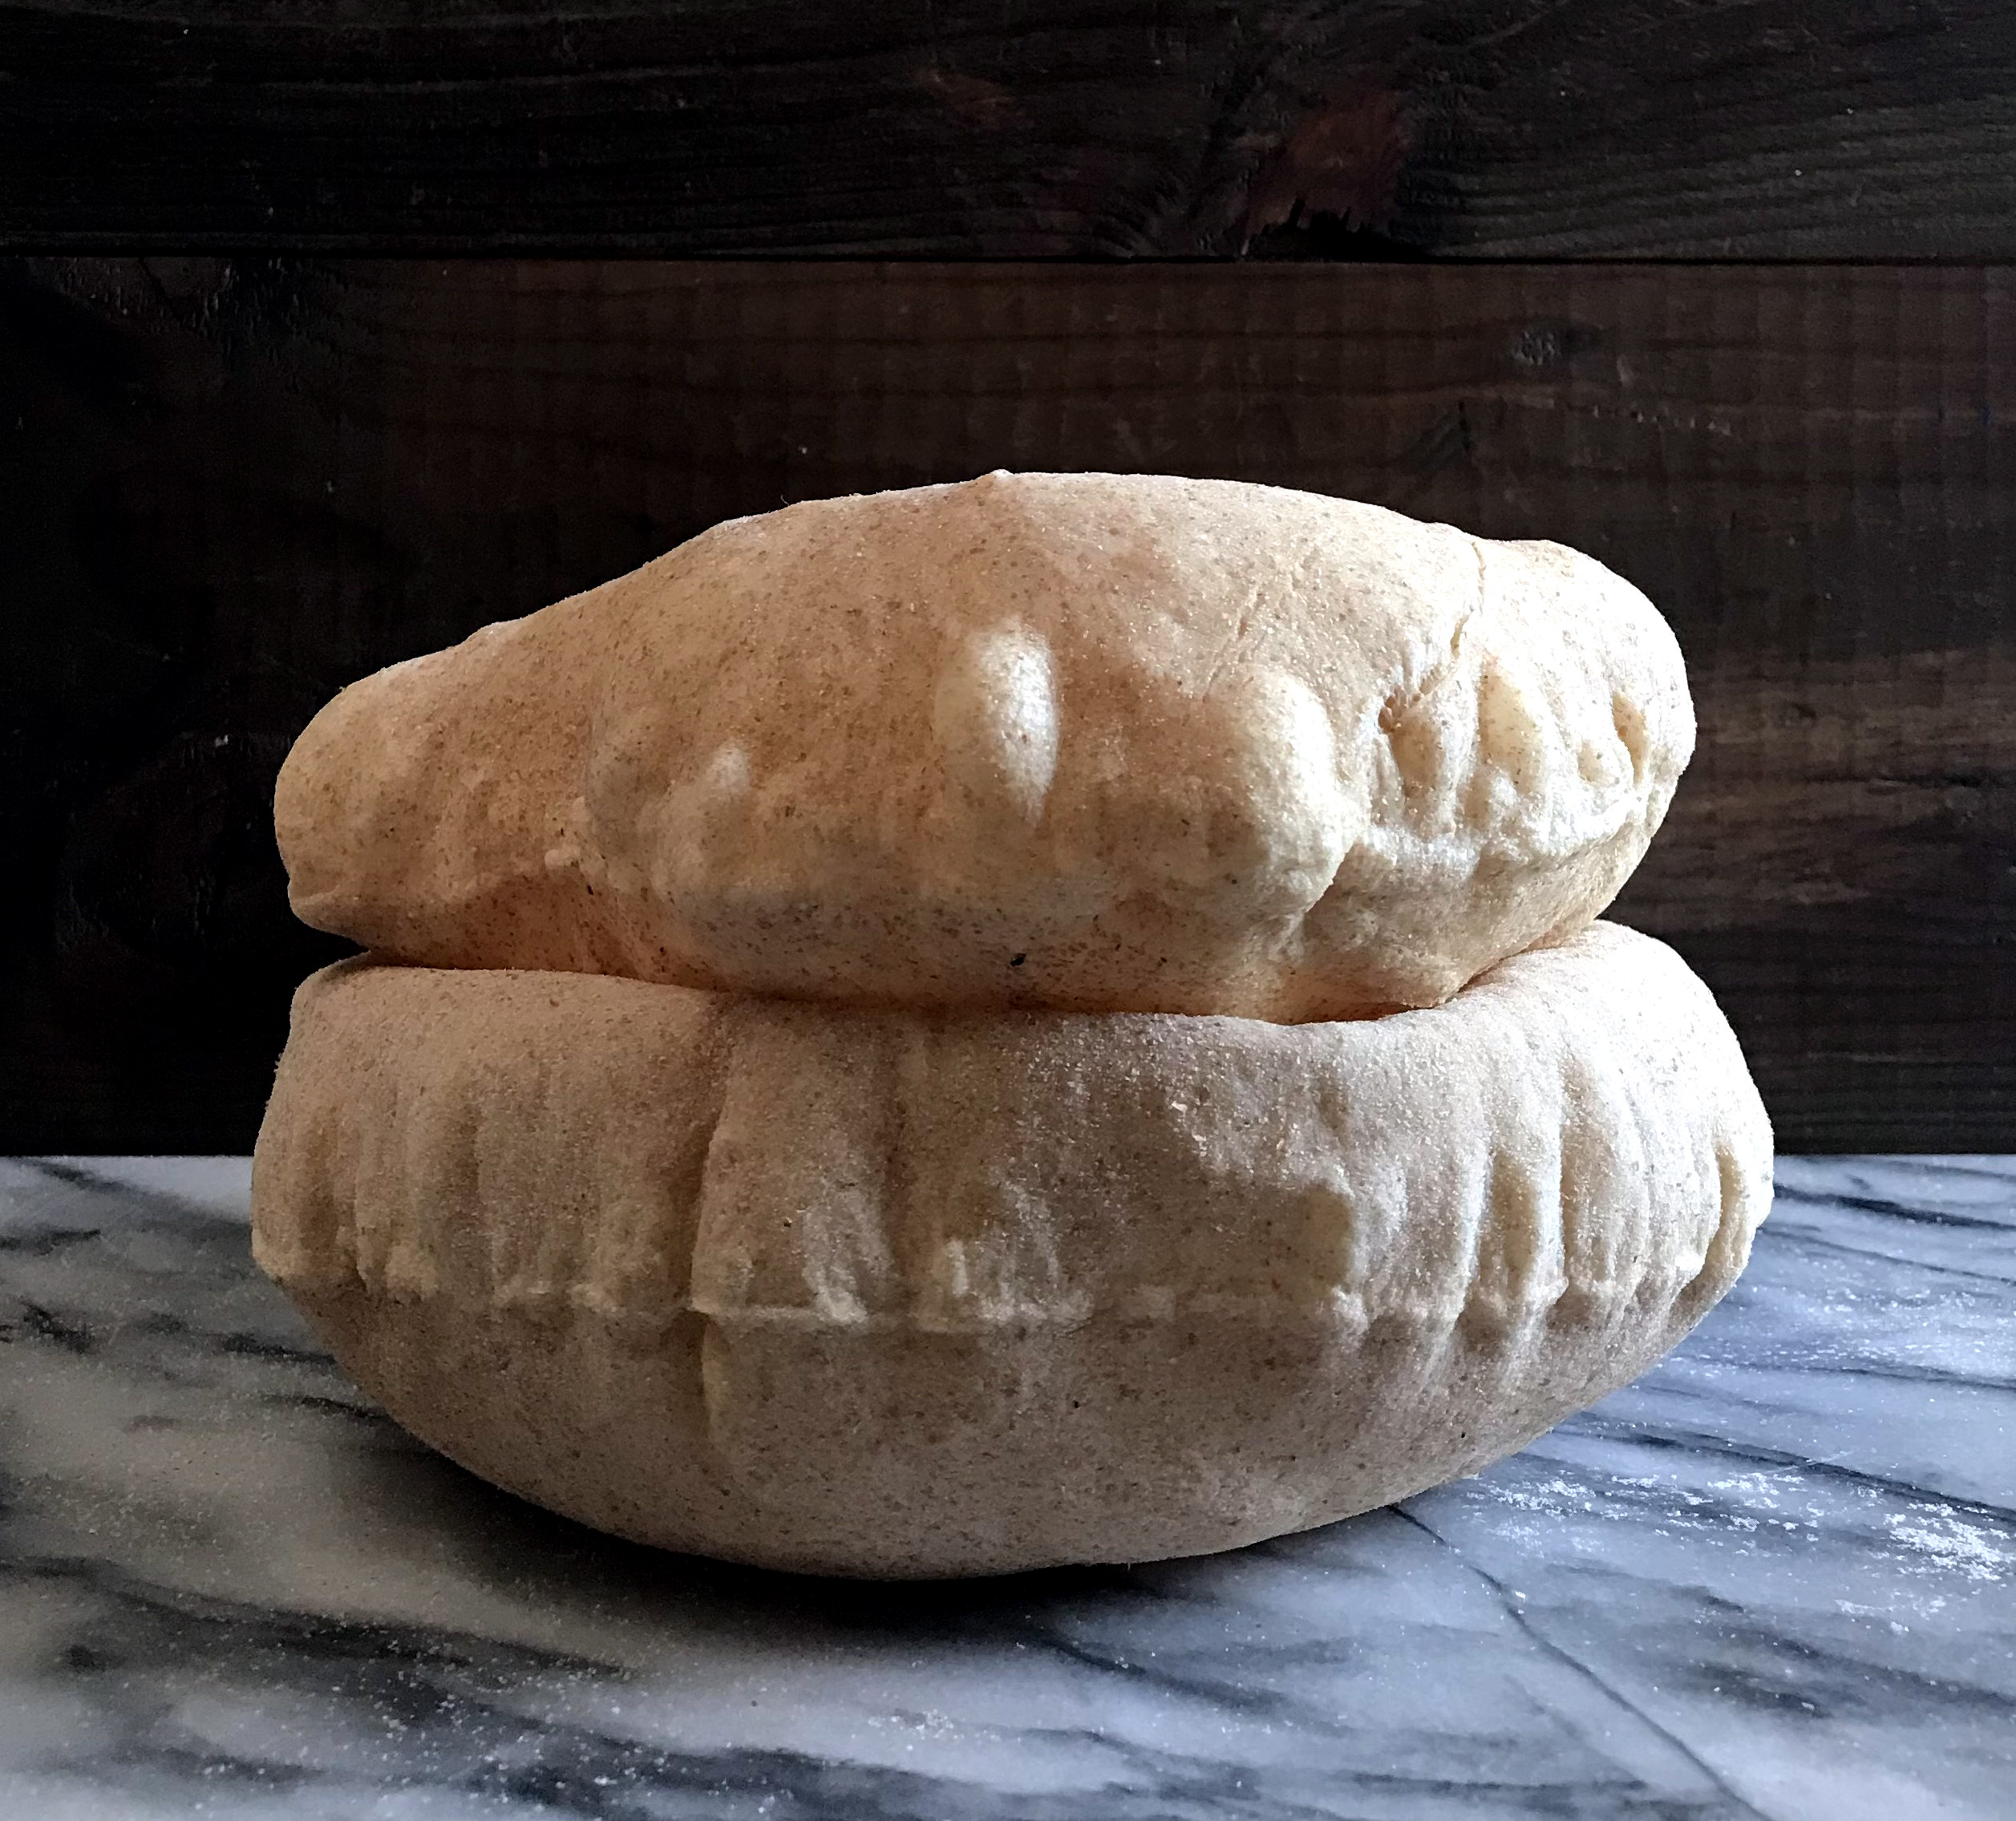 two freshly baked pitas filled with air, stacked one on the other